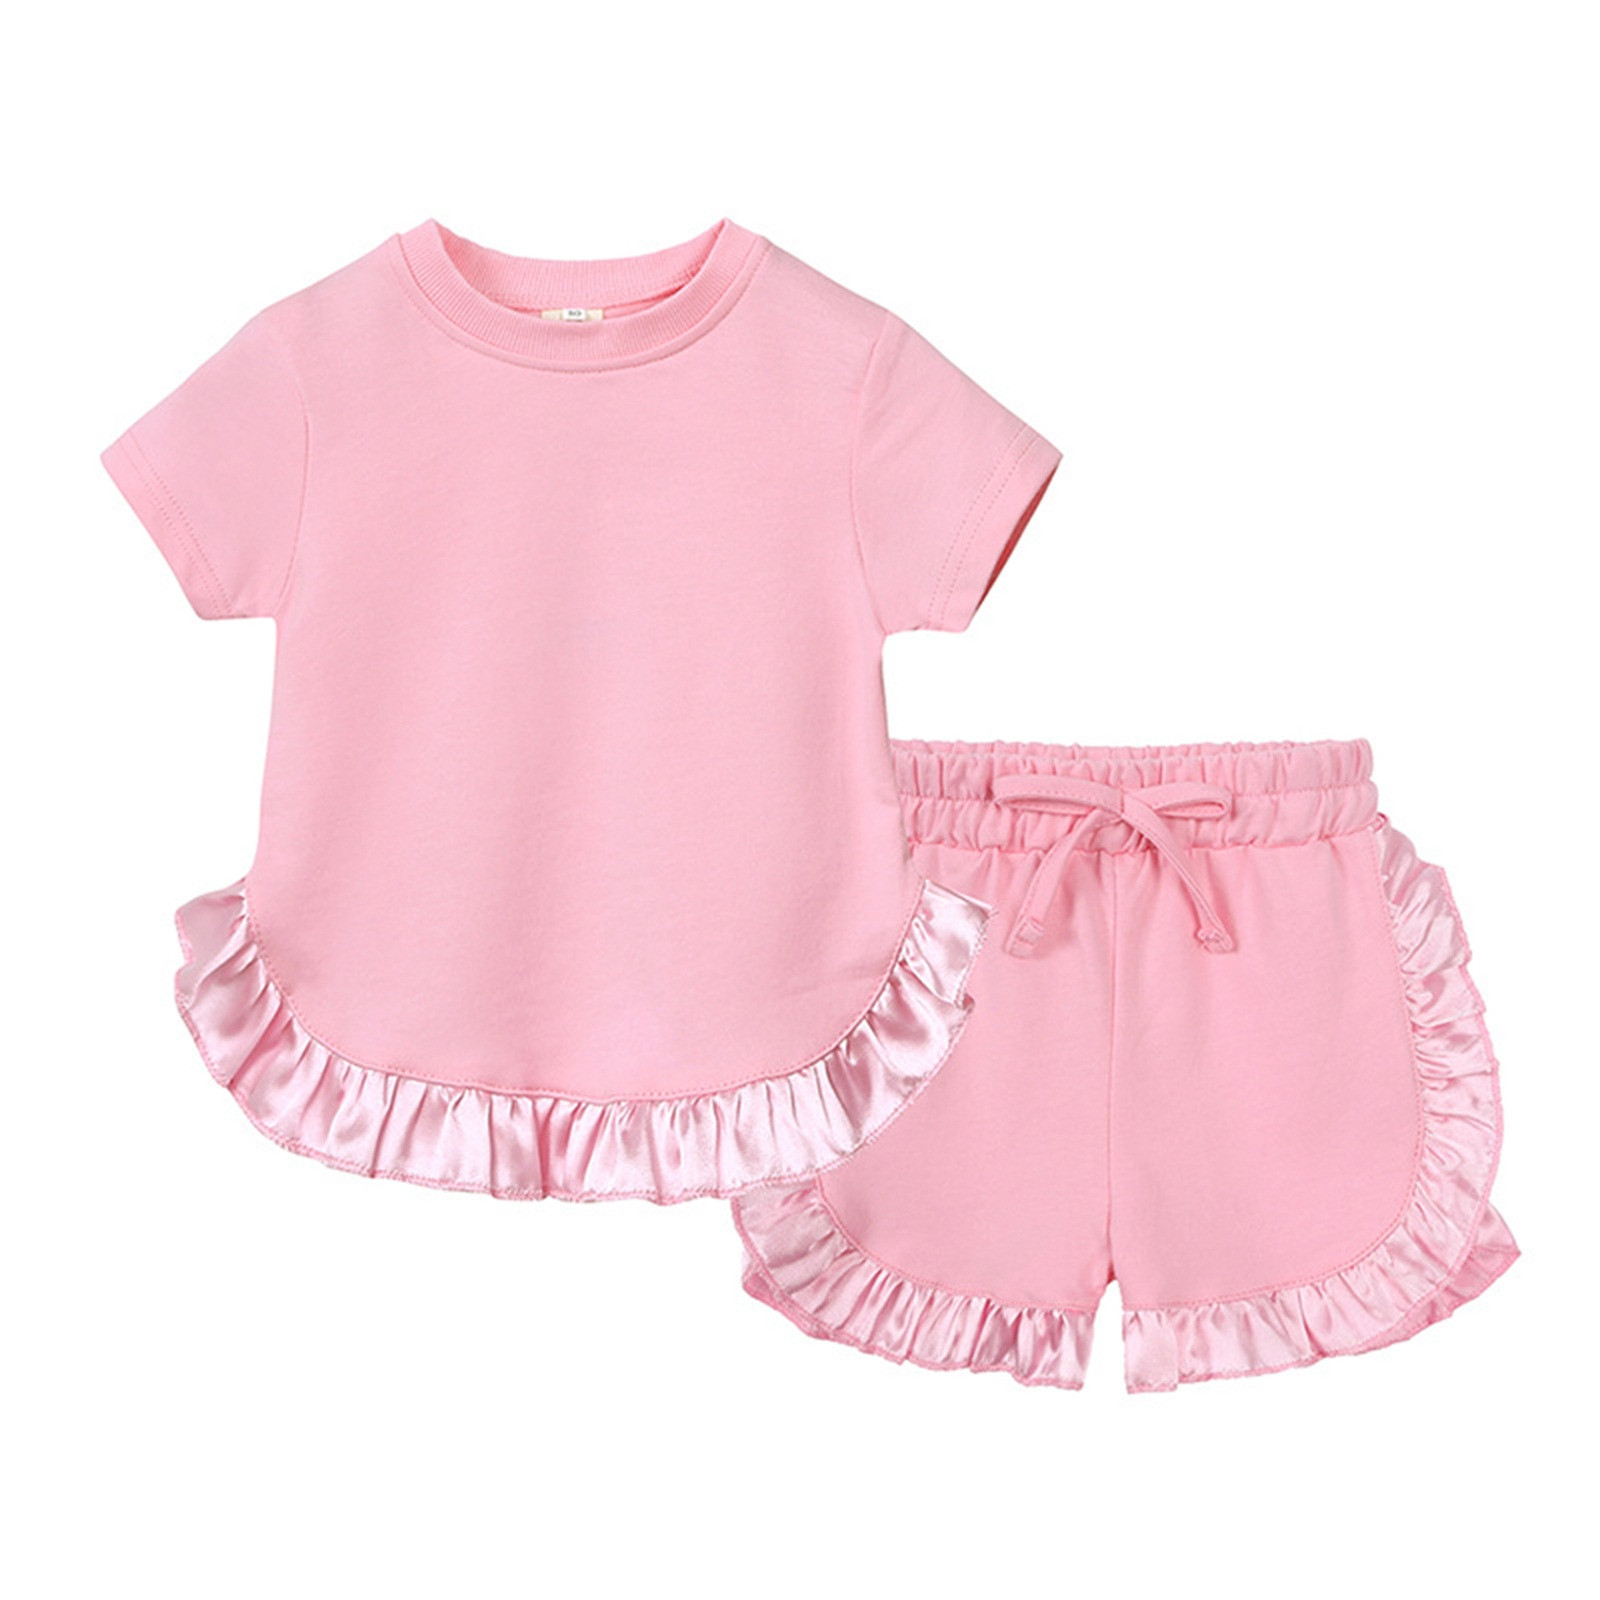 Cute Summer Toddler Girls Outfits Set Kids Baby Spring Solid Cotton ...